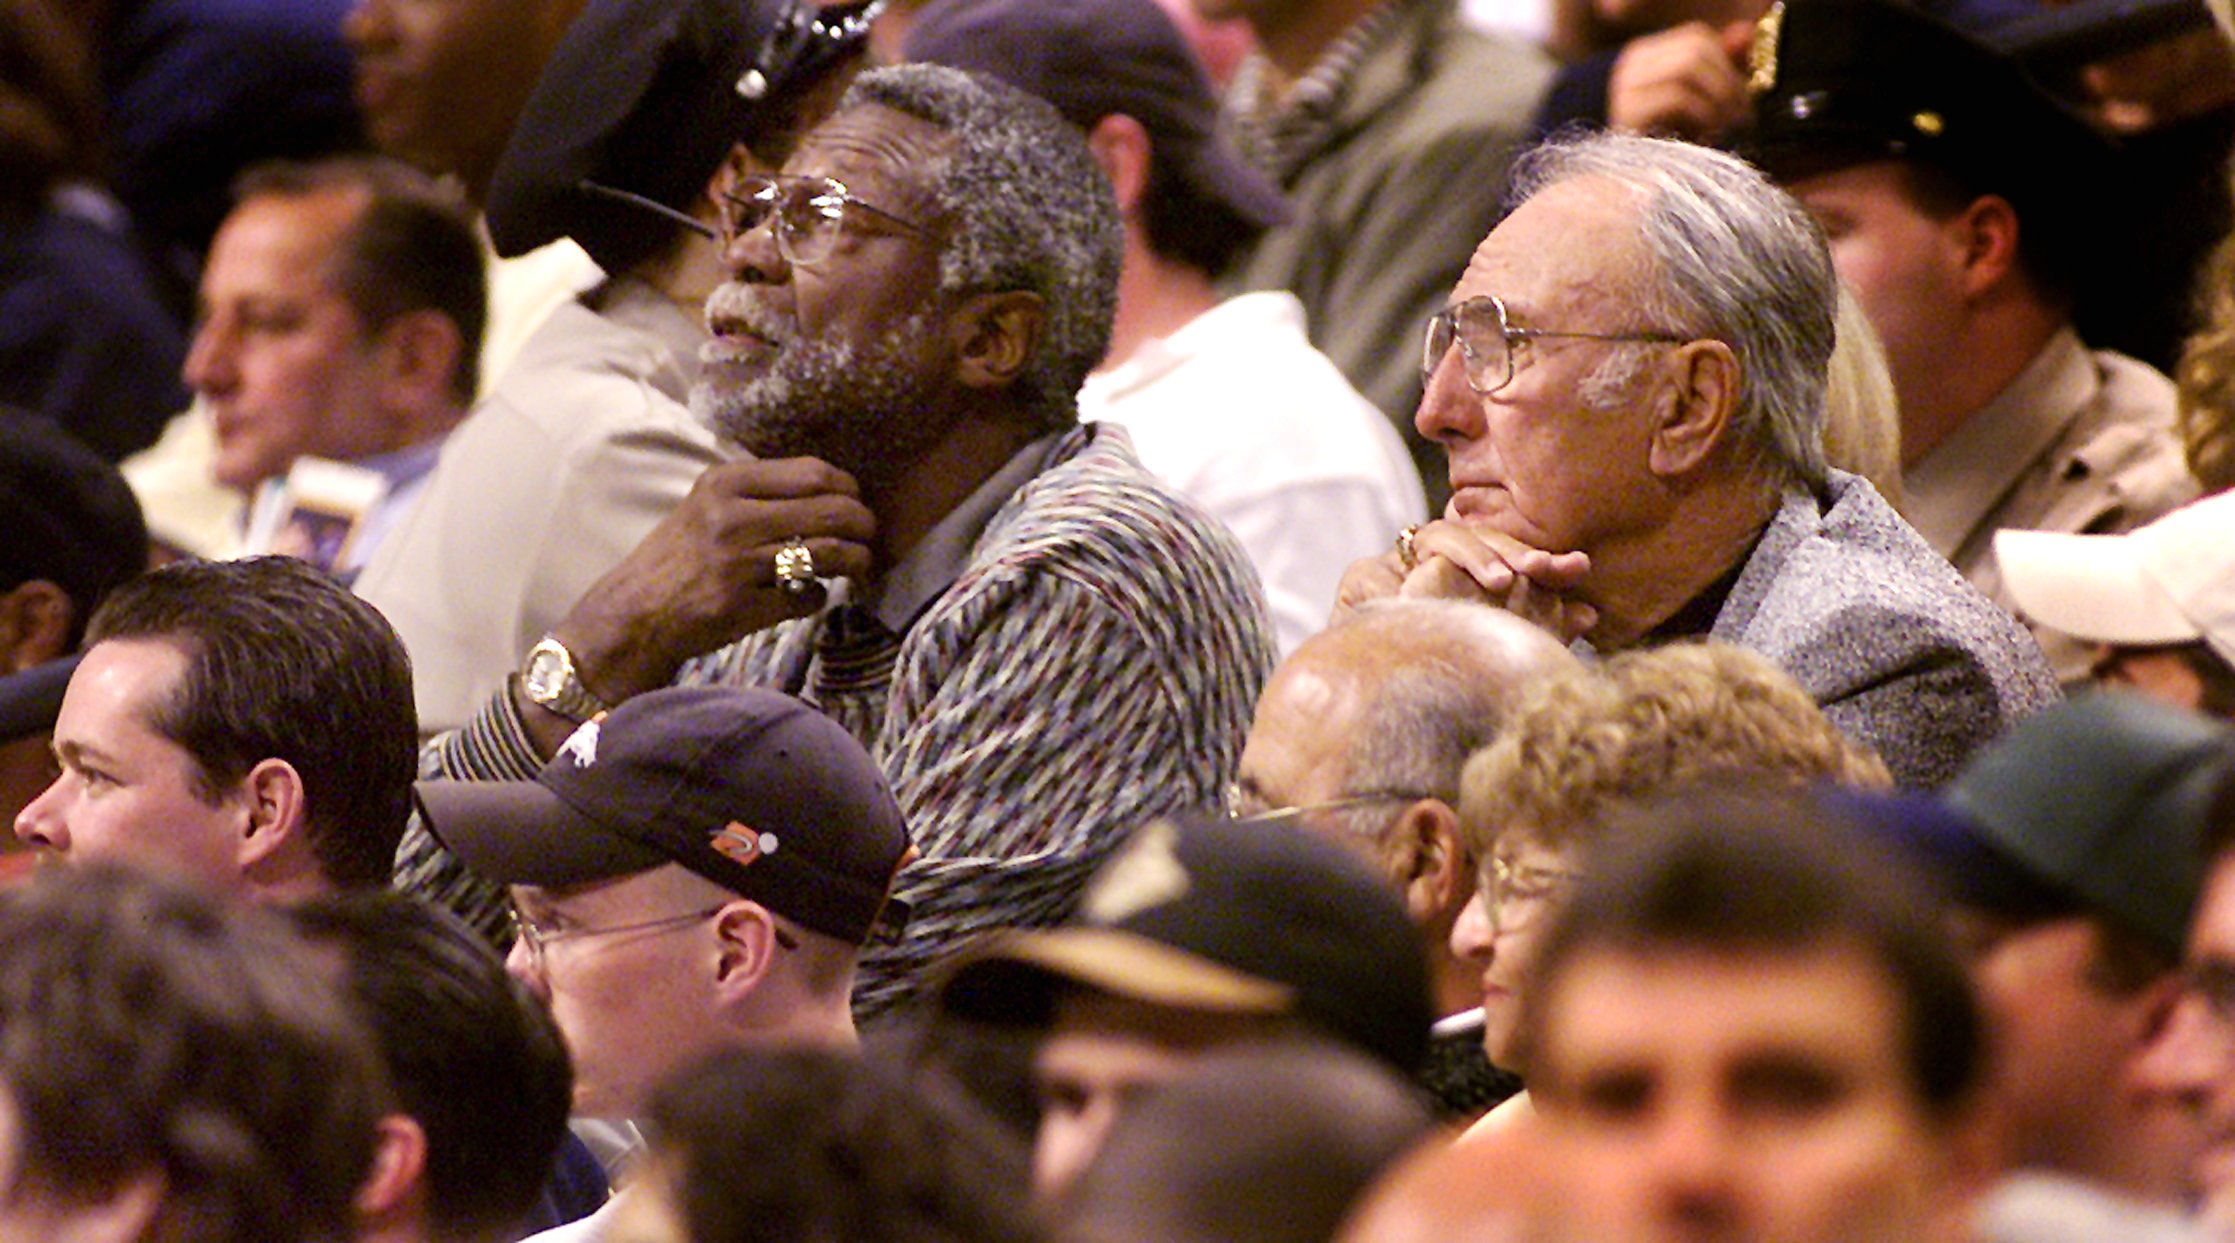 Boston Celtics greats Bill Russell, left, and Bob Cousy watch the action during a Celtics game.